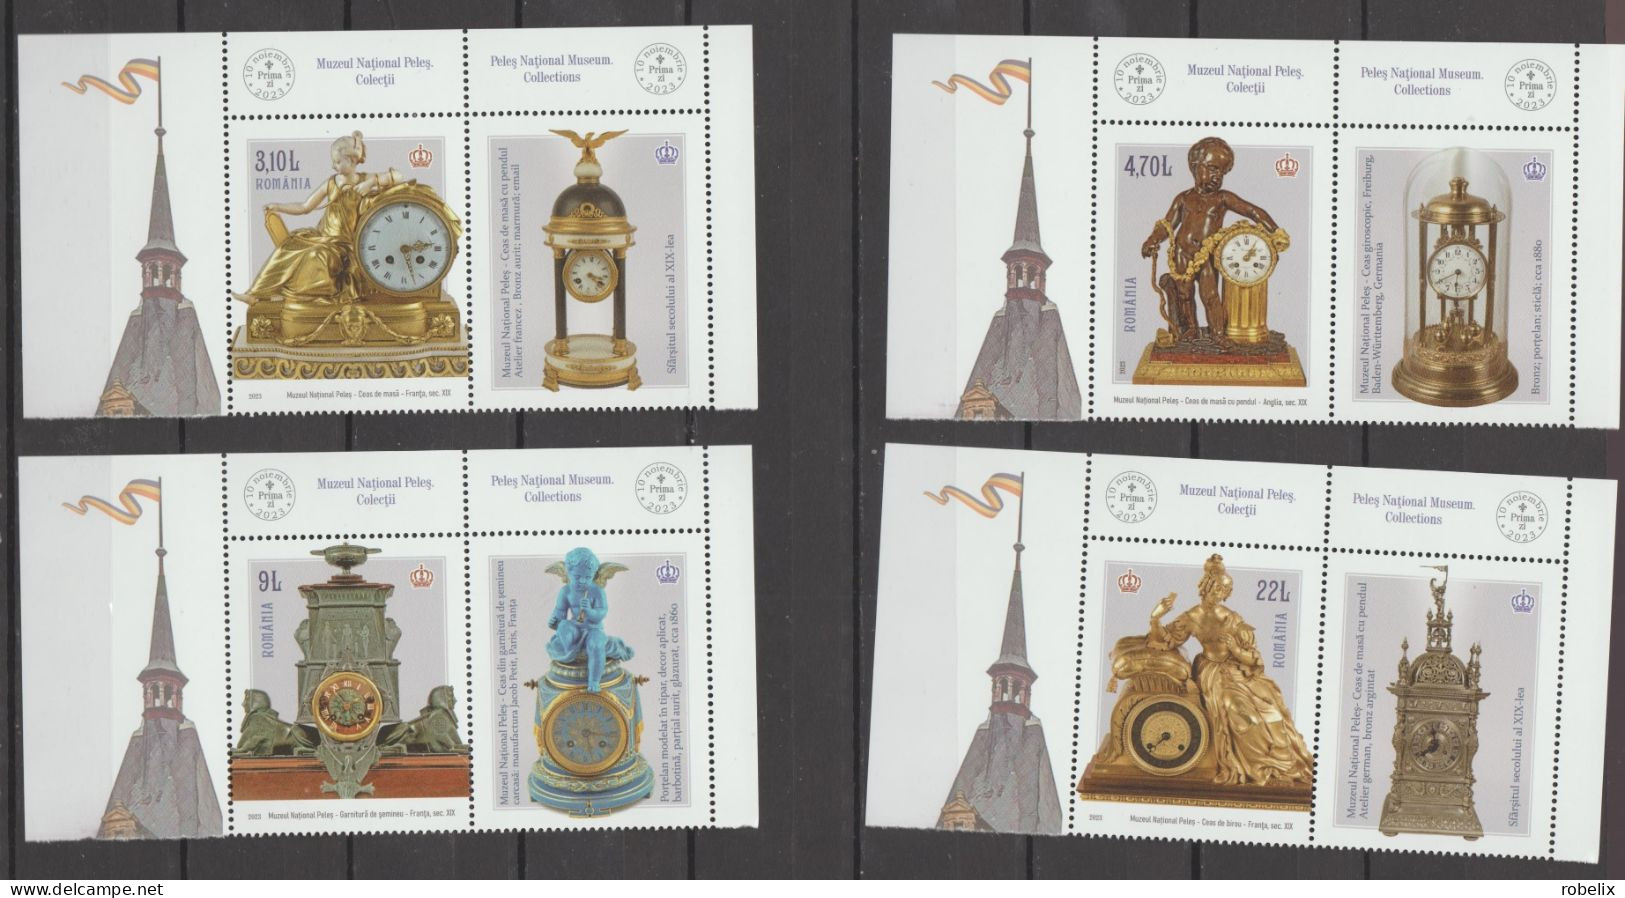 ROMANIA 2023  PELEȘ NATIONAL MUSEUM - COLLECTIONS - CLOCKS  Set Of 4 Stamps With Labels  MNH** - Clocks